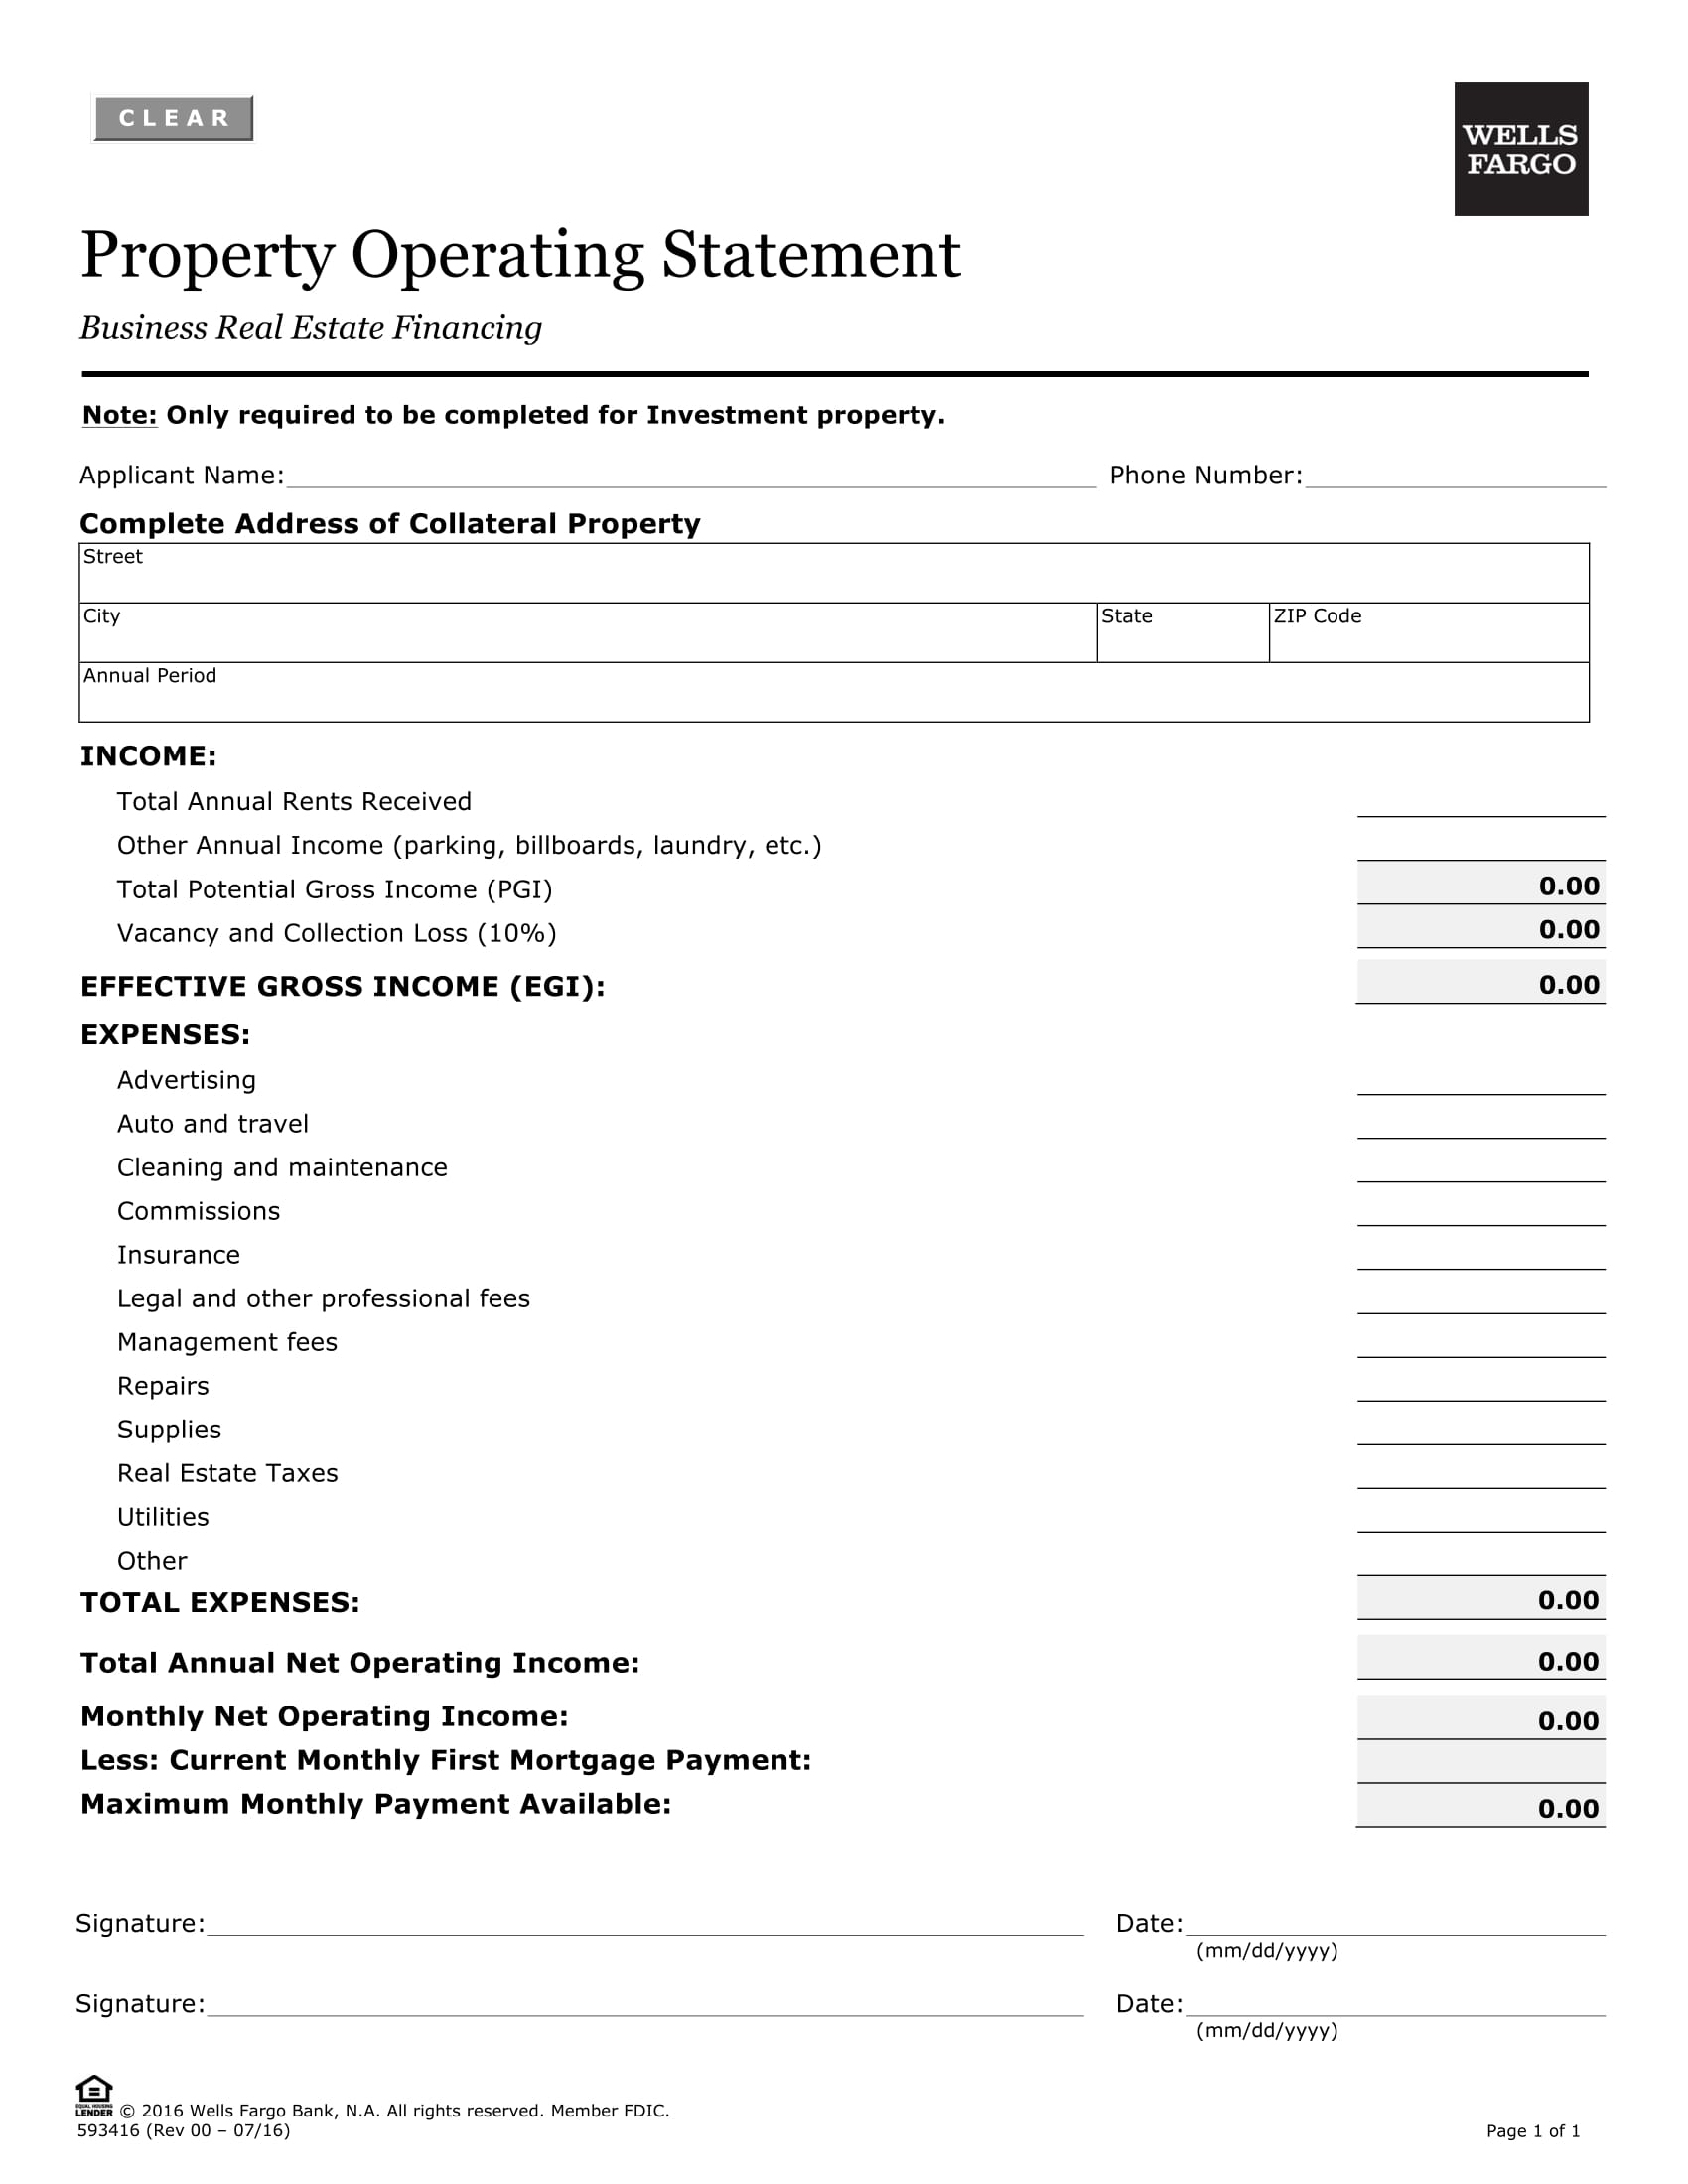 property operating statement form 1